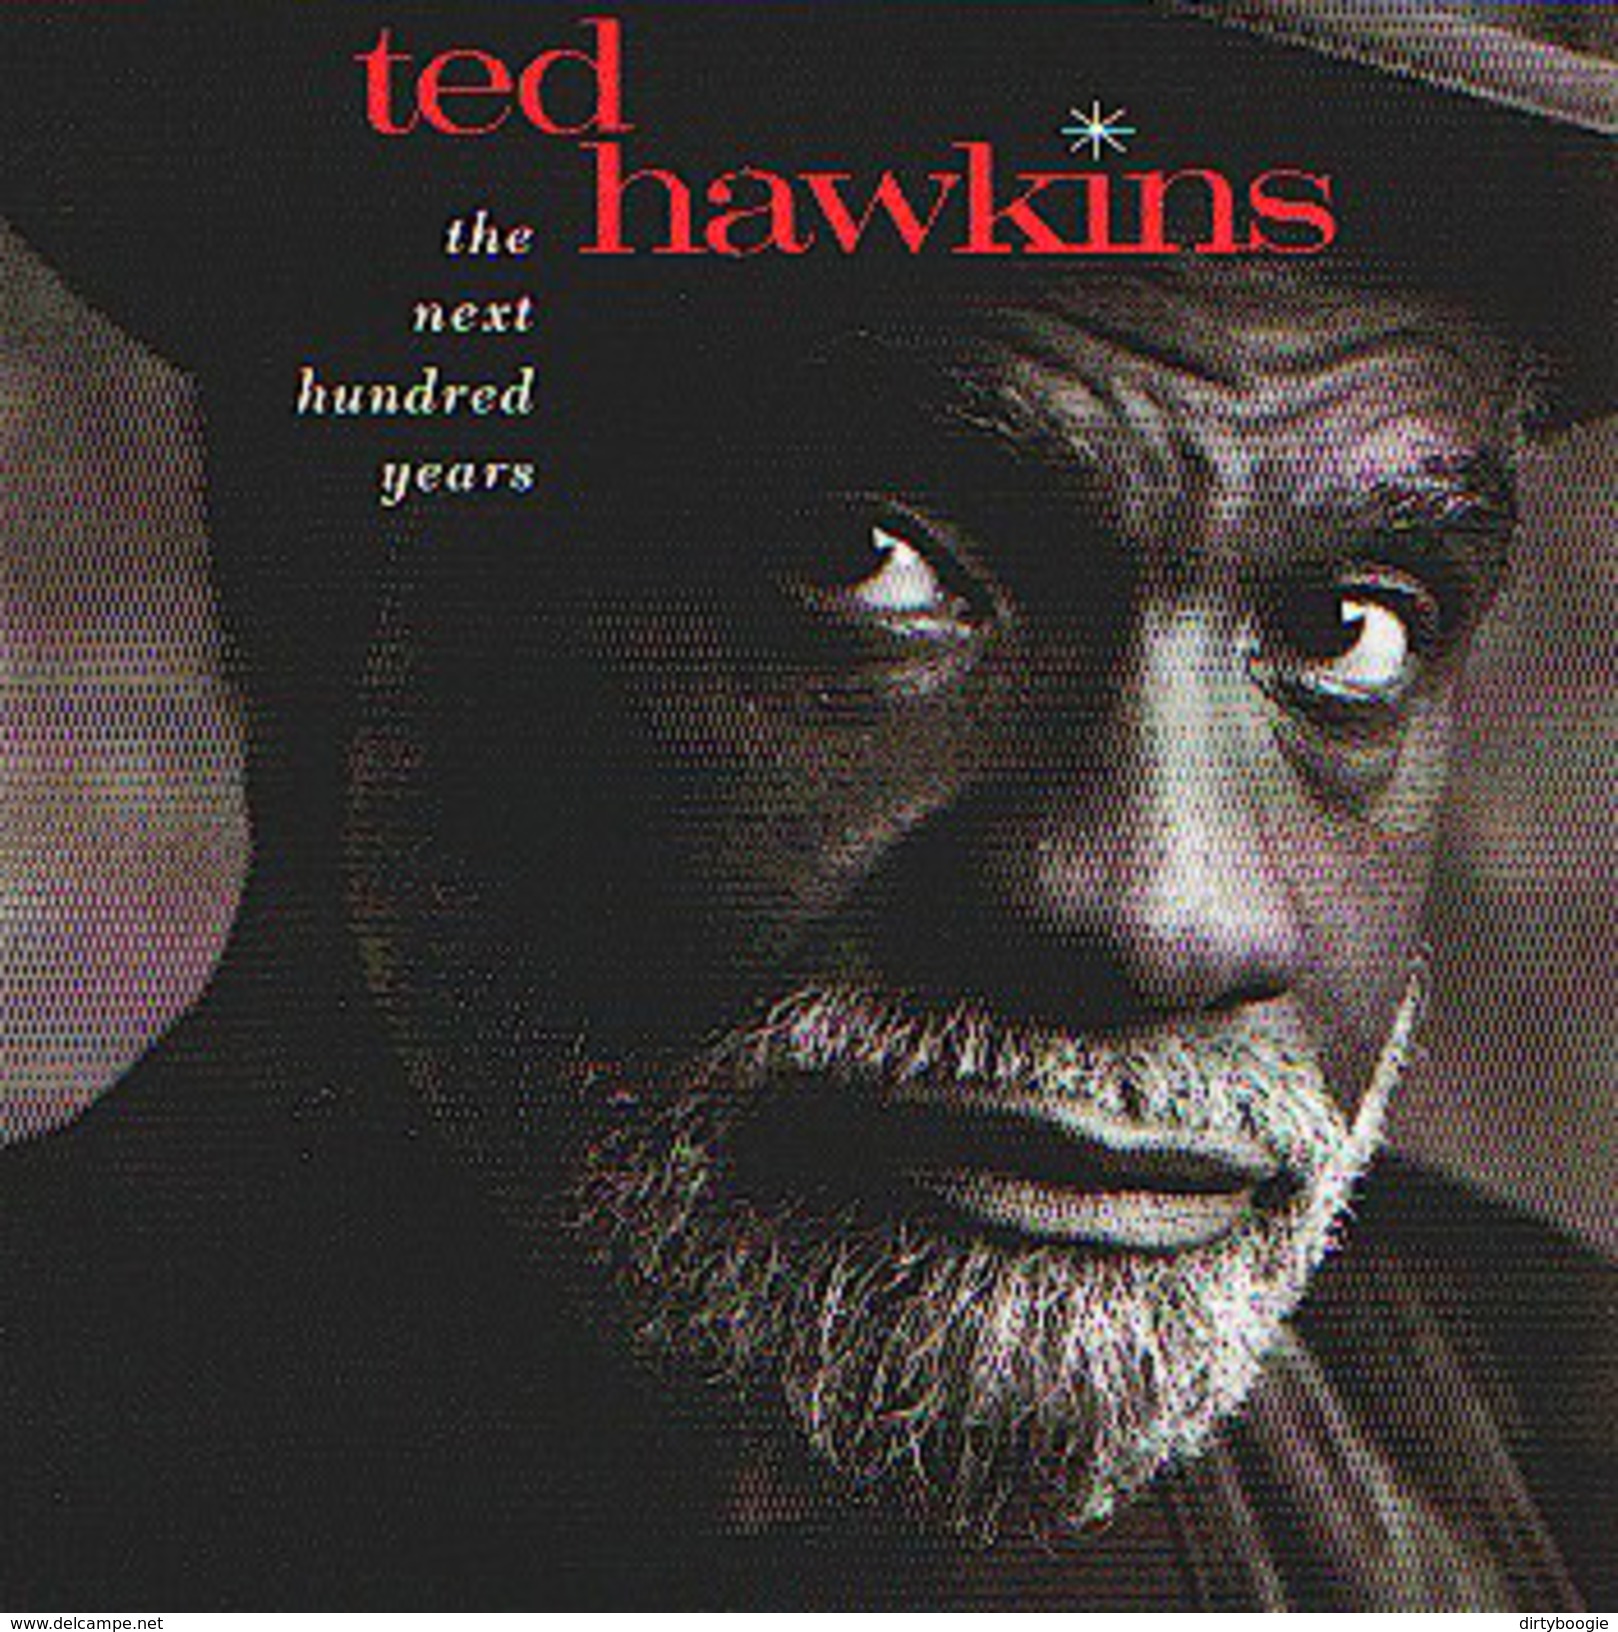 Ted HAWKINS - The Next Hundred Years - CD - COUNTRY FOLK BLUES - Country & Folk